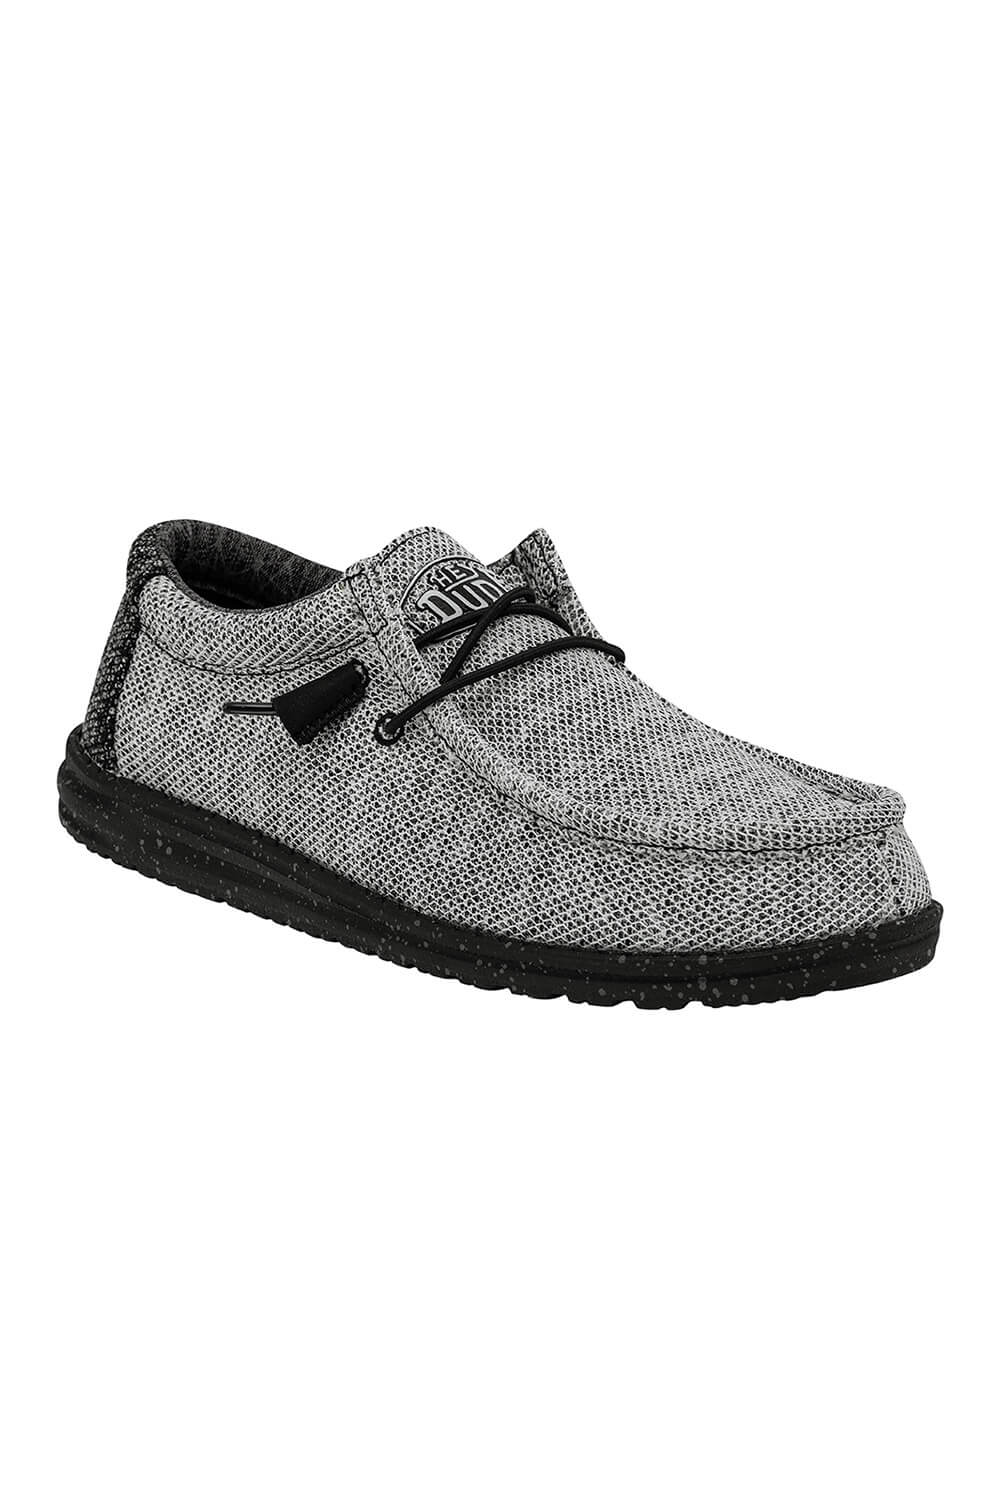 HEYDUDE Men's Wally Stretch Poly Shoes in Dark Web